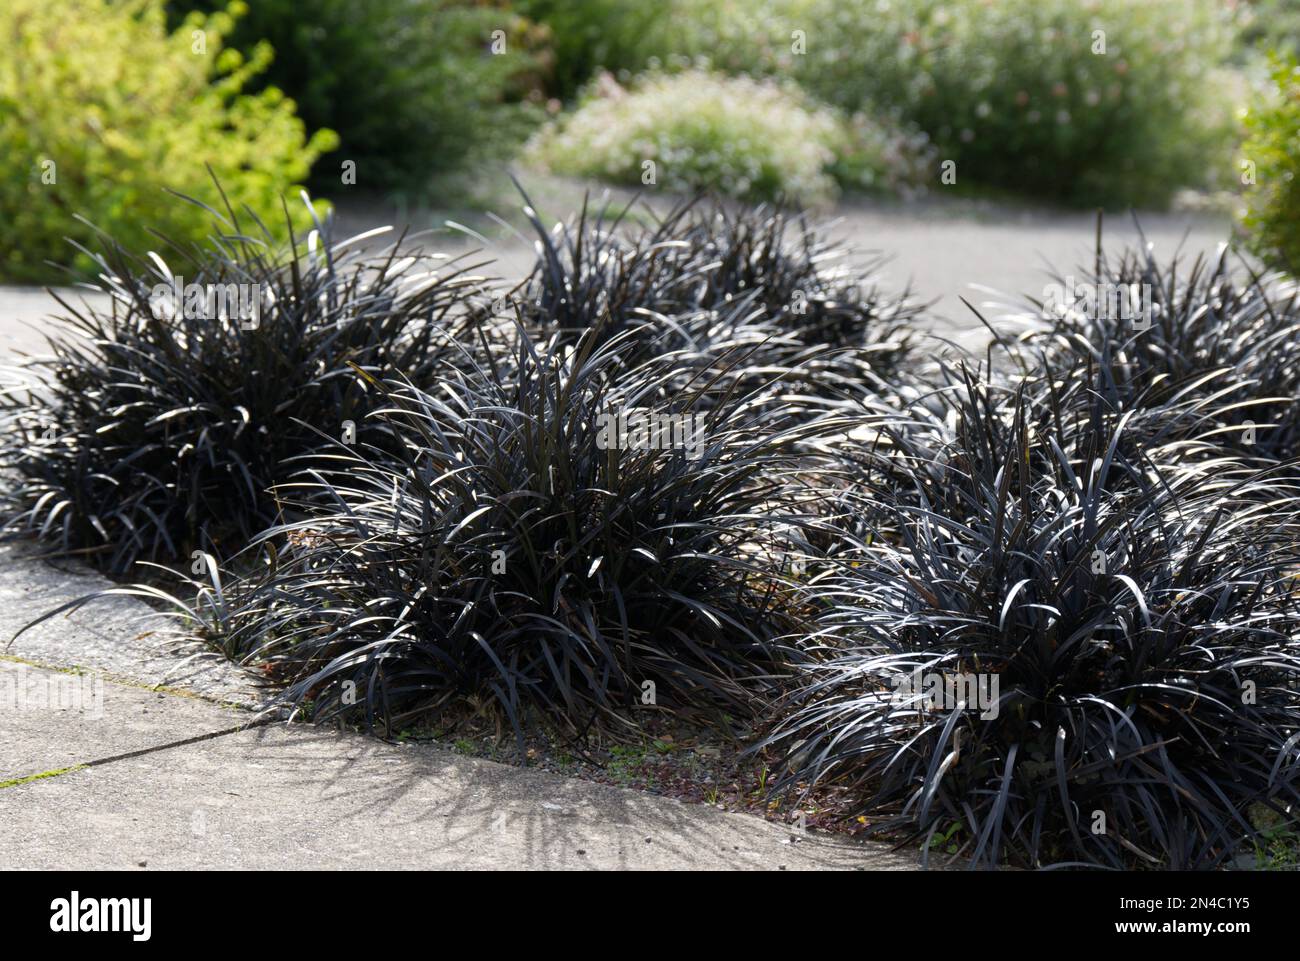 Plants of ornamental black grass Ophiopogon planiscapus 'Nigrescens' growing in a bed in a UK garden September Stock Photo